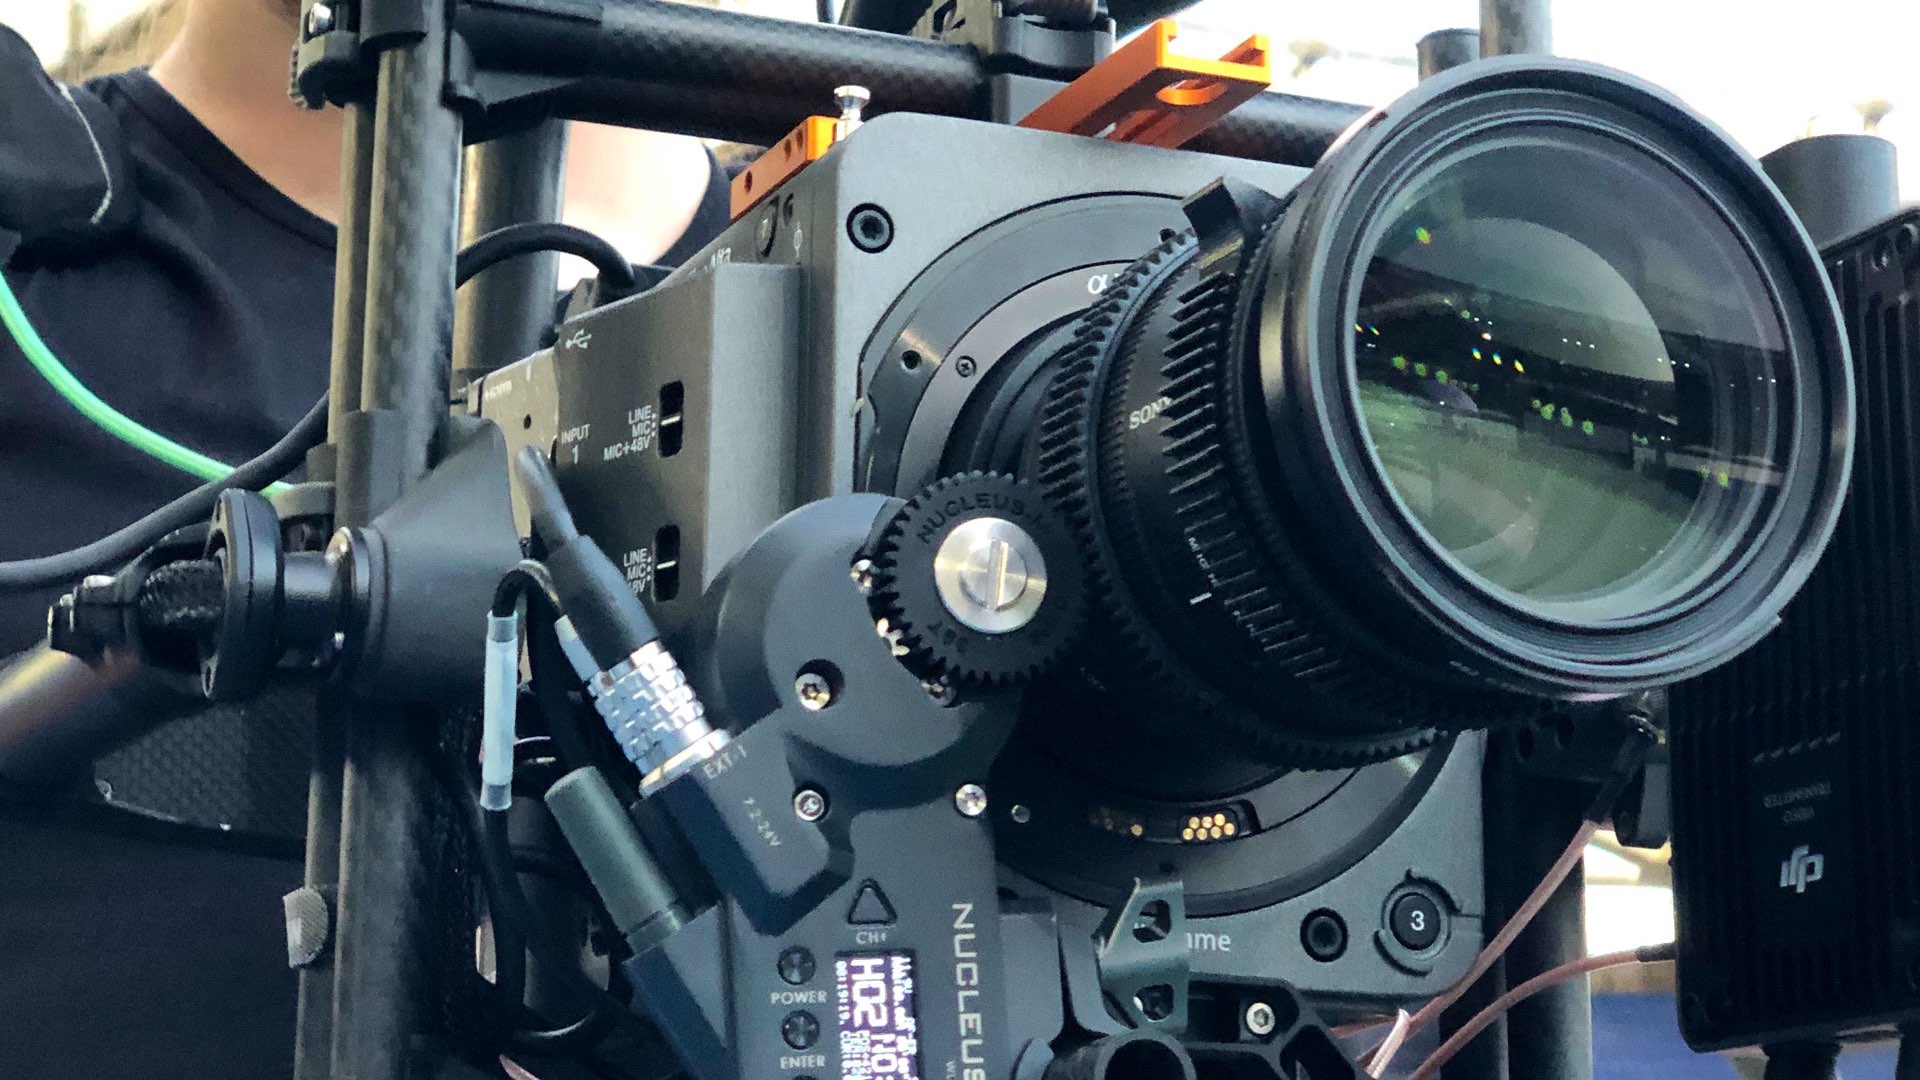 Sony VENICE 2 + BURANO + FR7: Deadly Mixture for Cinematic Broadcasting